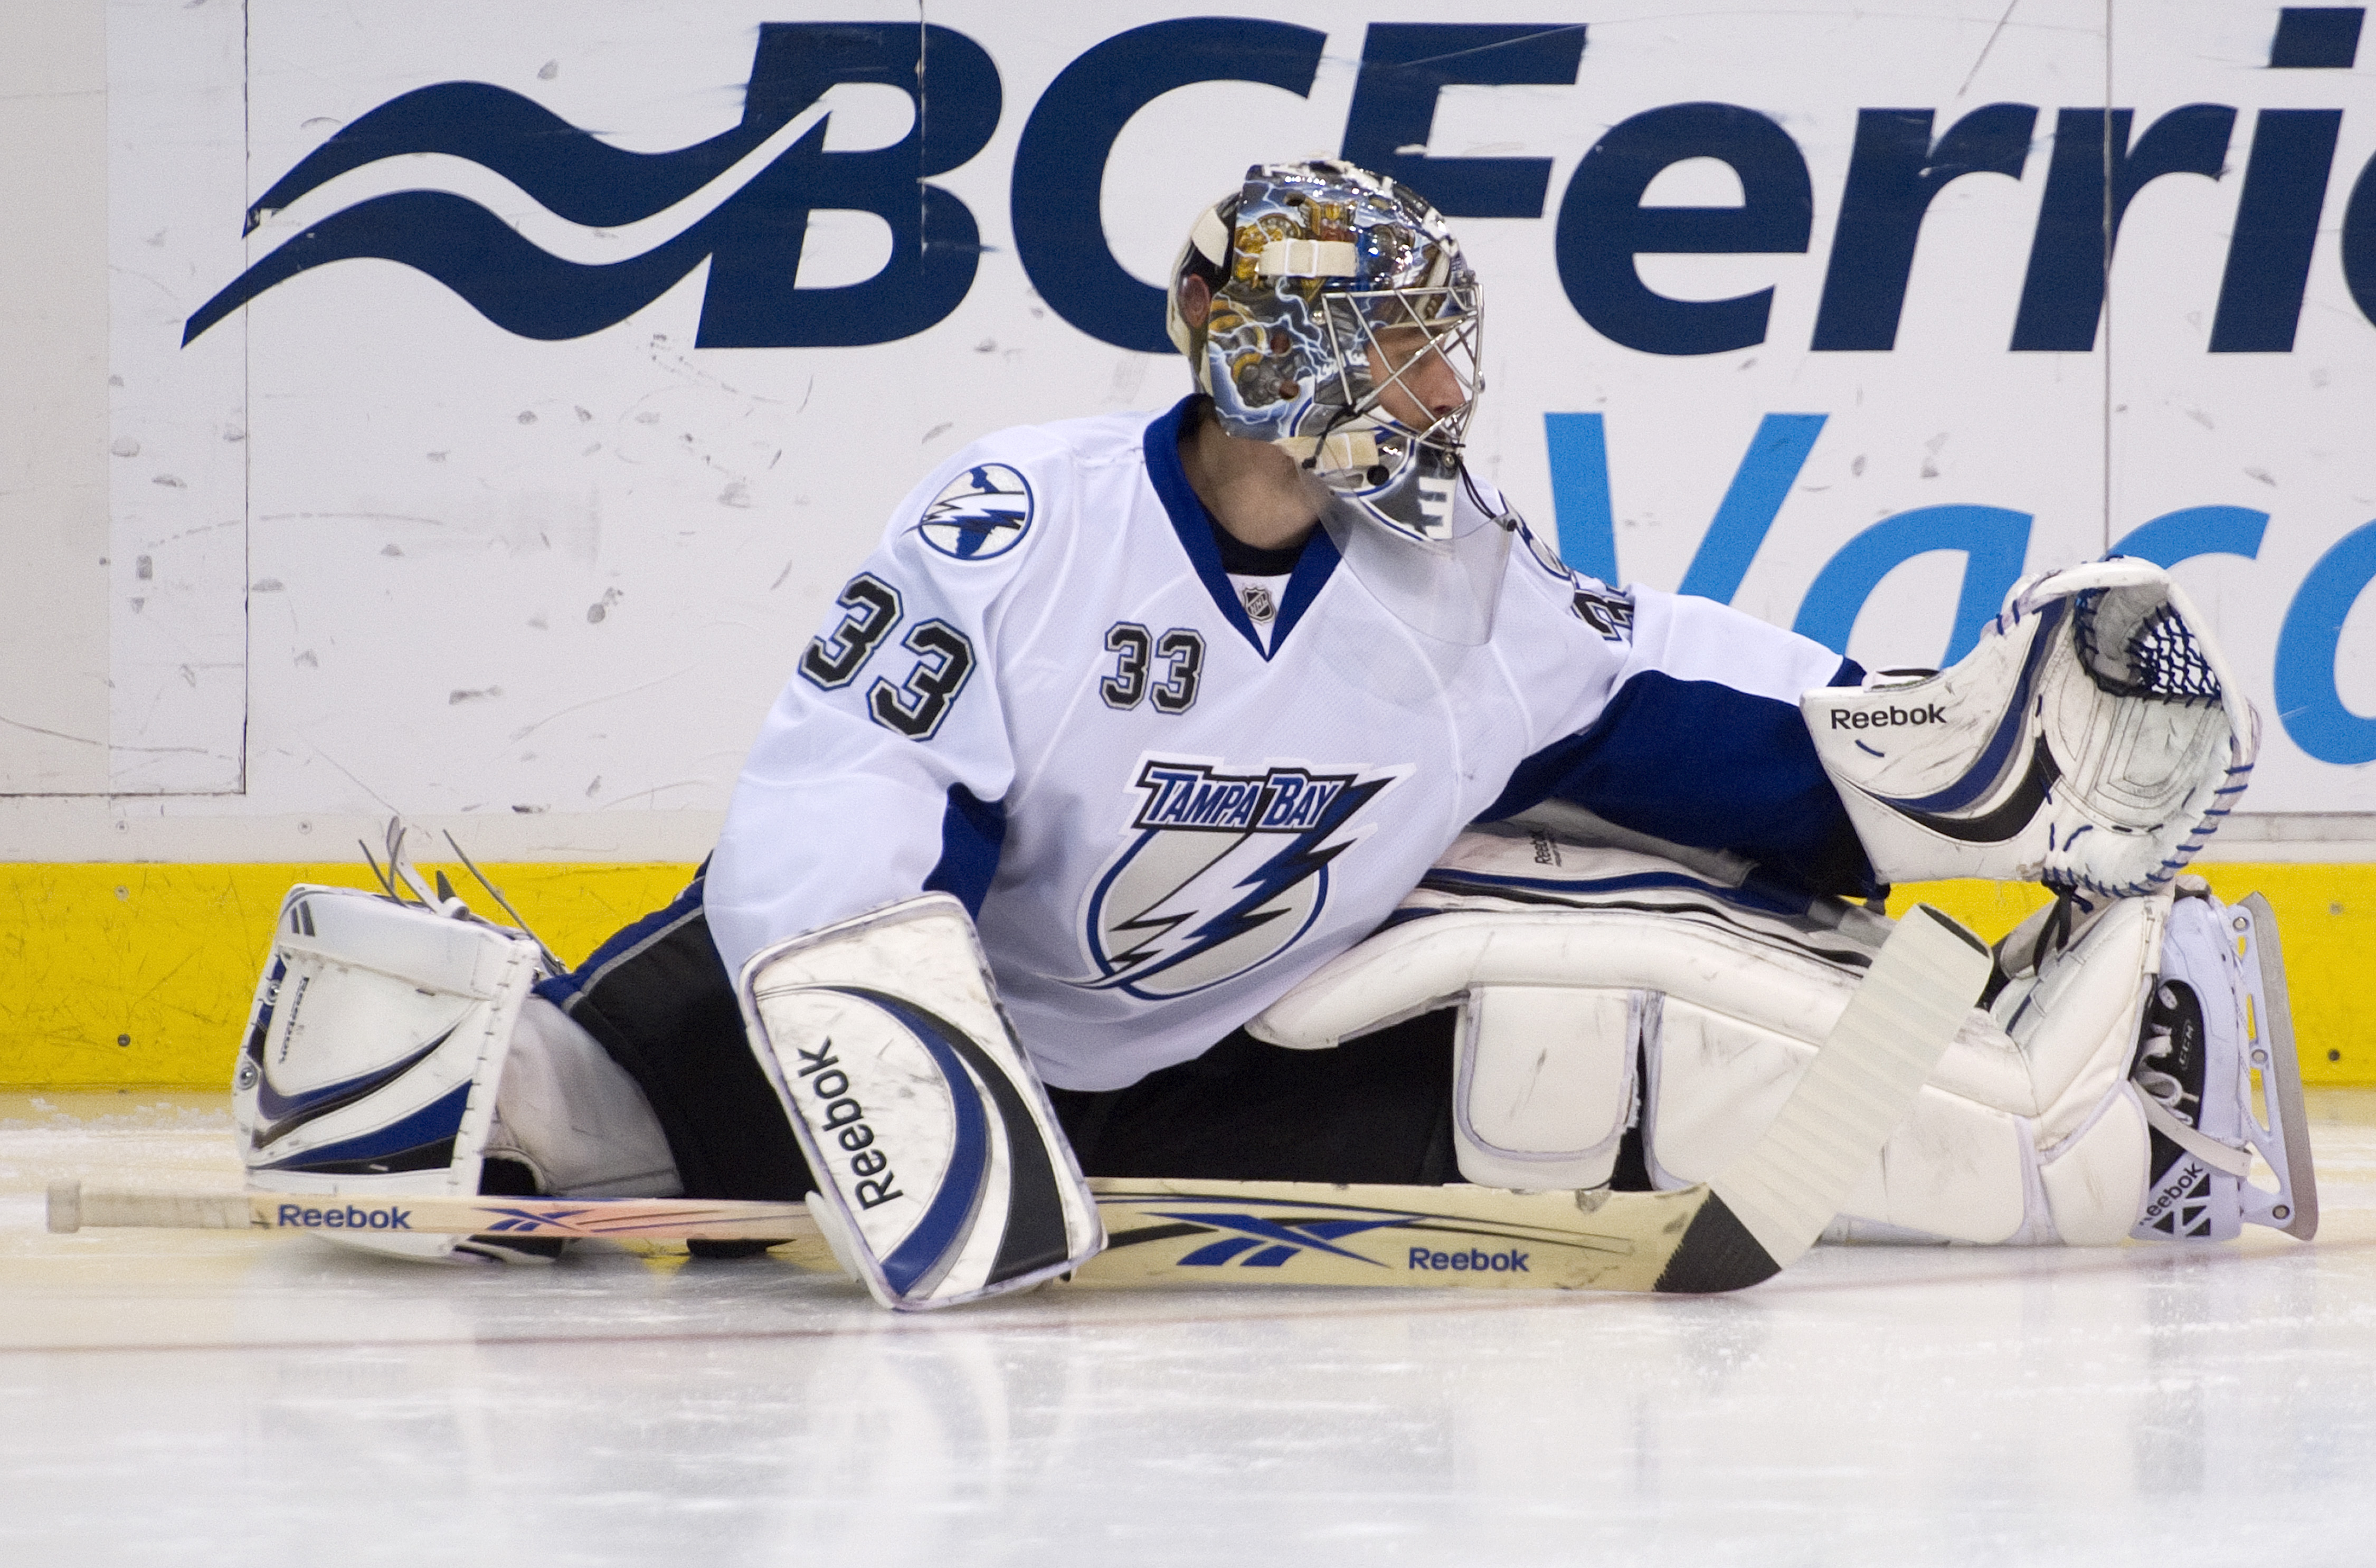 VANCOUVER, CANADA - DECEMBER 11: Goalie Dan Ellis #33 of the Tampa Bay Lightning stretches during the pre-game warmup prior to NHL action on December 11, 2010 against the Vancouver Canucks at Rogers Arena in Vancouver, BC, Canada.  (Photo by Rich Lam/Gett